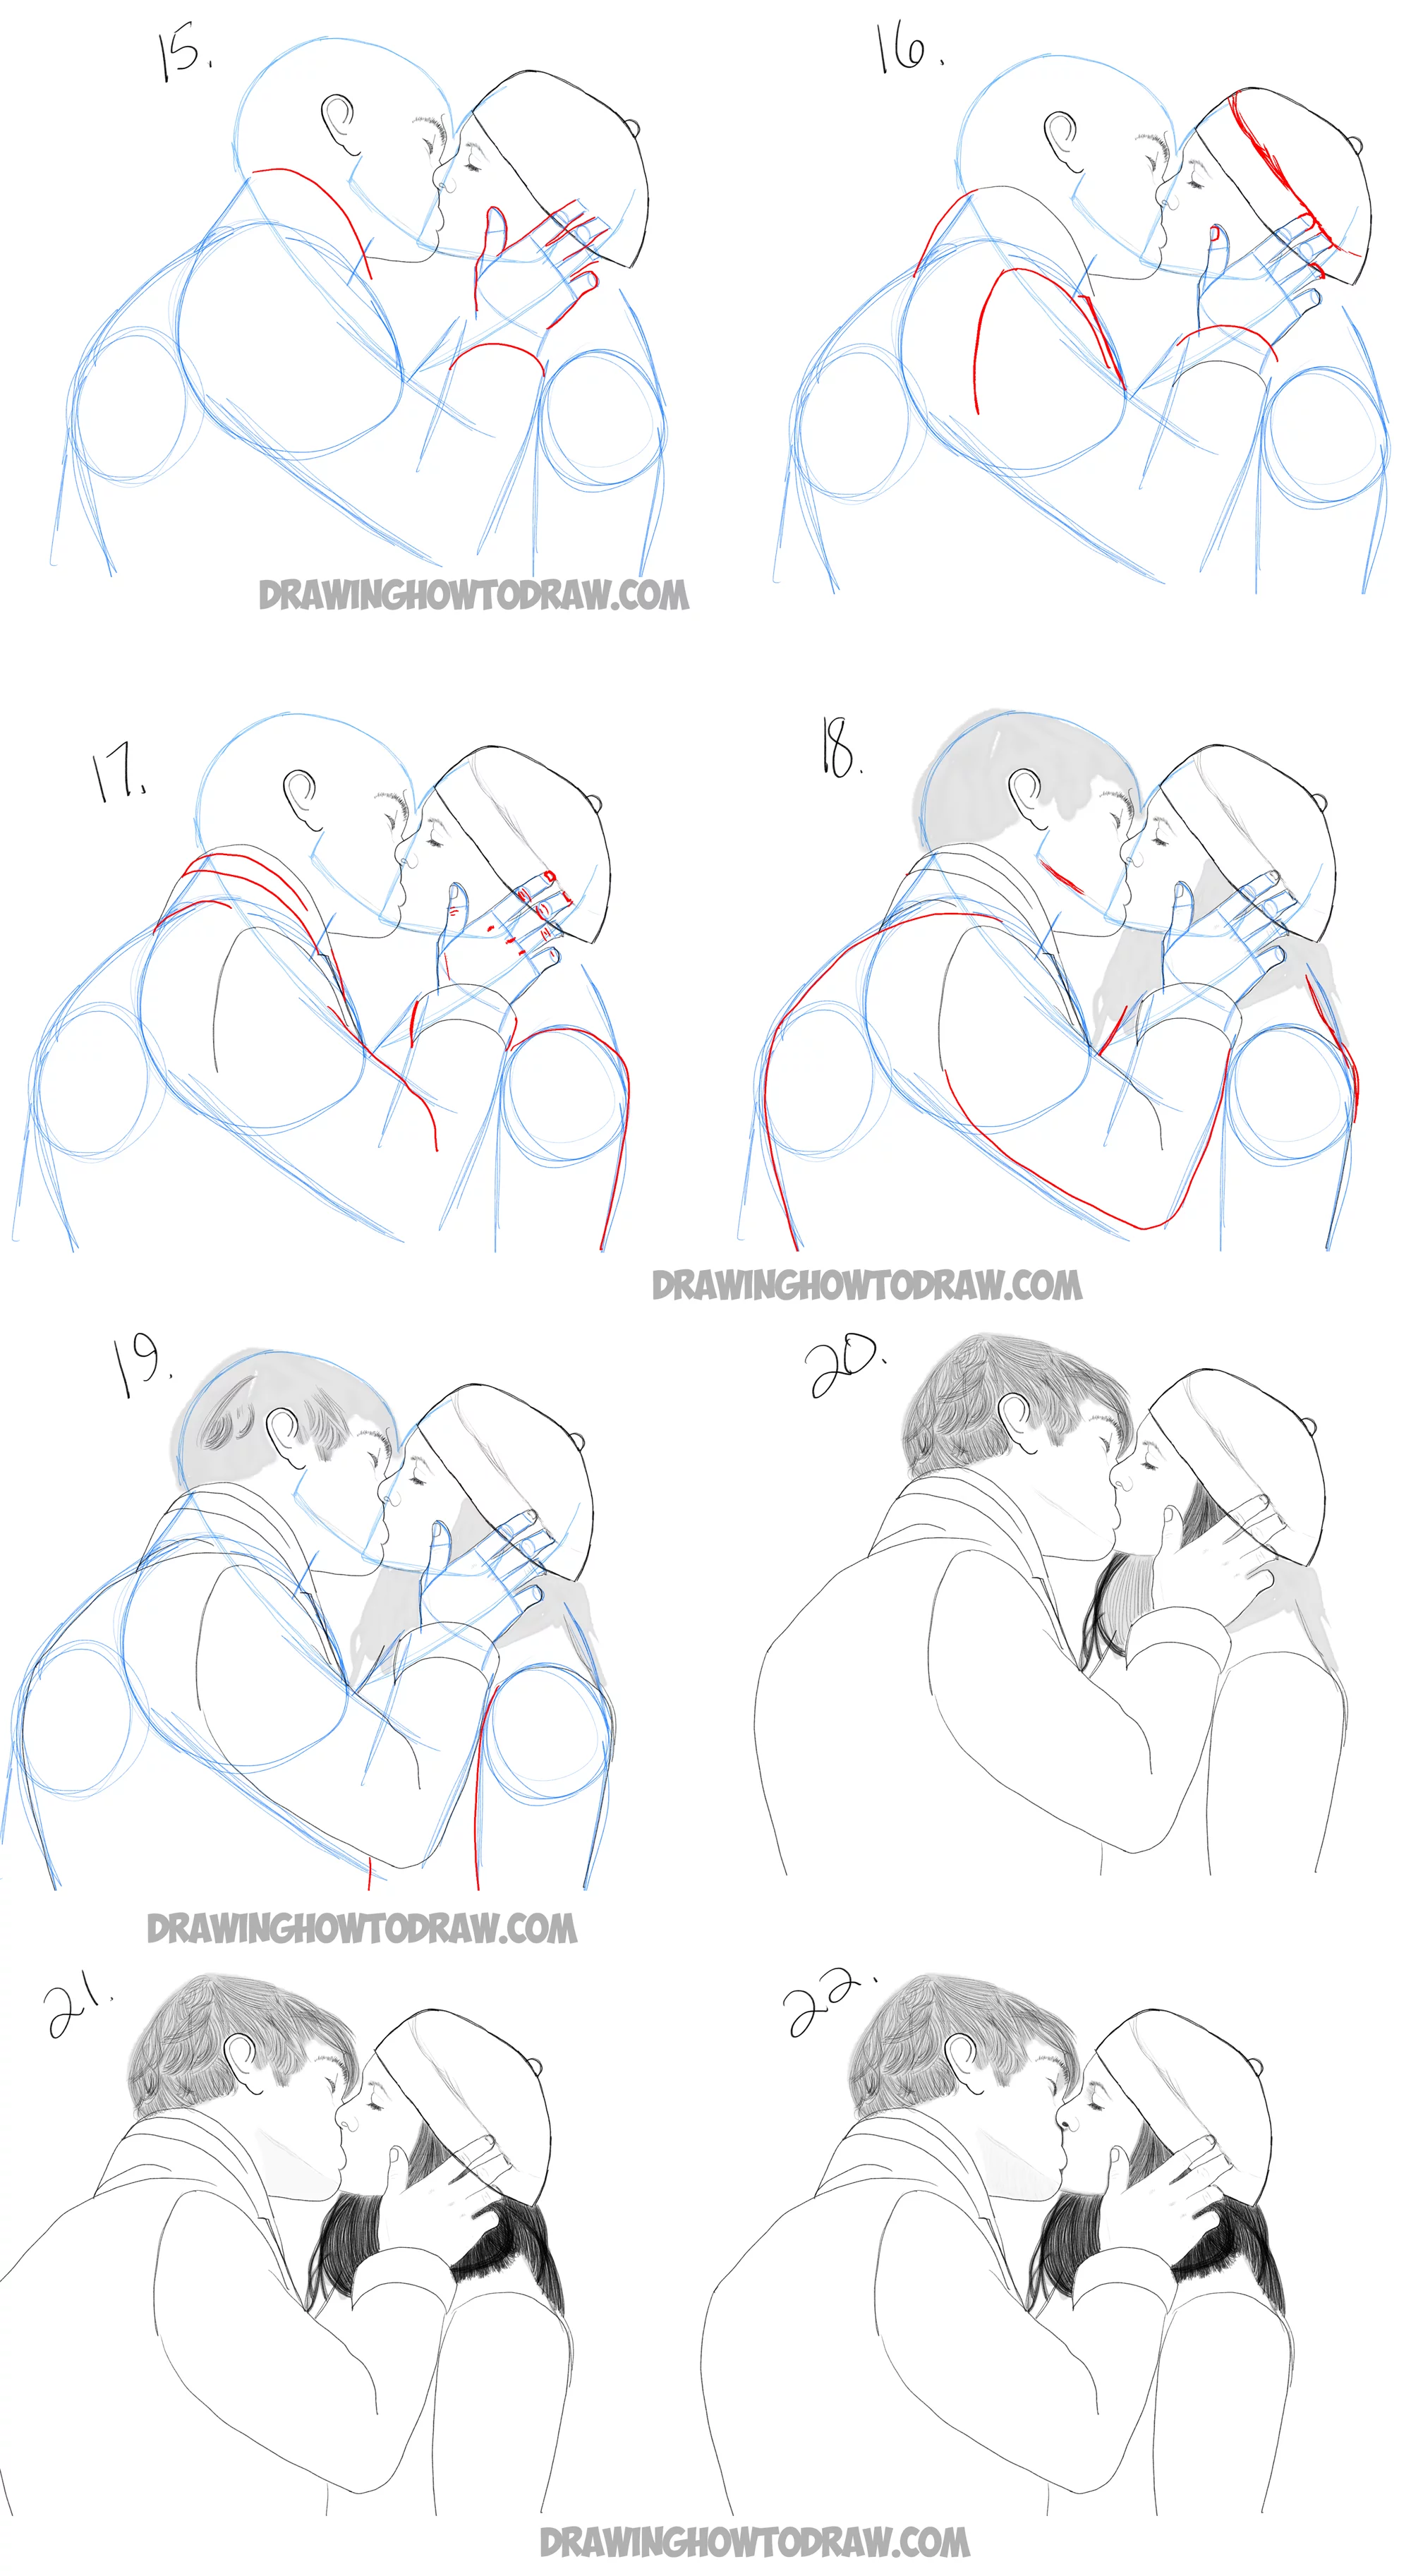 How to draw anime people kissing STEP BY STEP for beginners! 